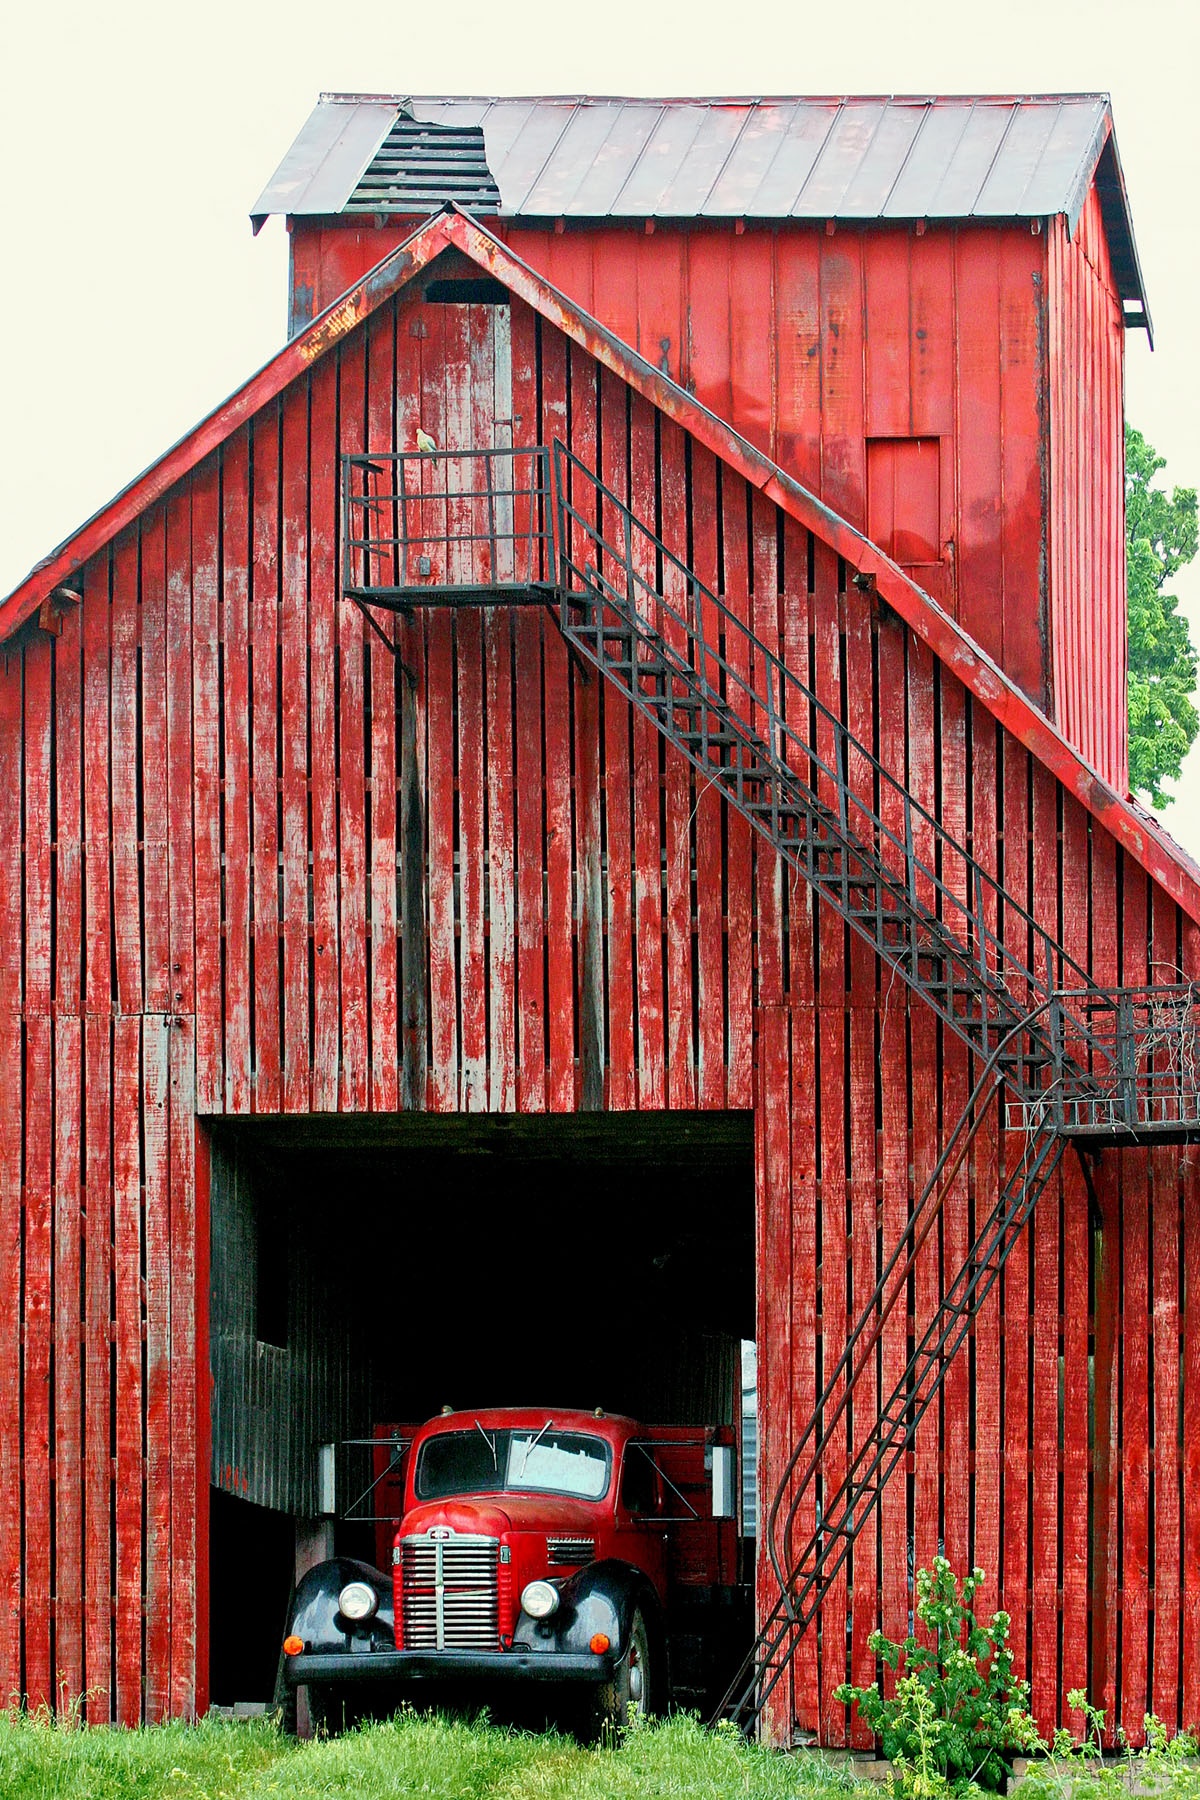 RED TRUCK - I use to pass this barn every day on the way to and from work, but it was always so cluttered around it you just couldn't get a good photo. Then one day this old red truck was there, and that  made  the  shot. I haven't seen the truck since!